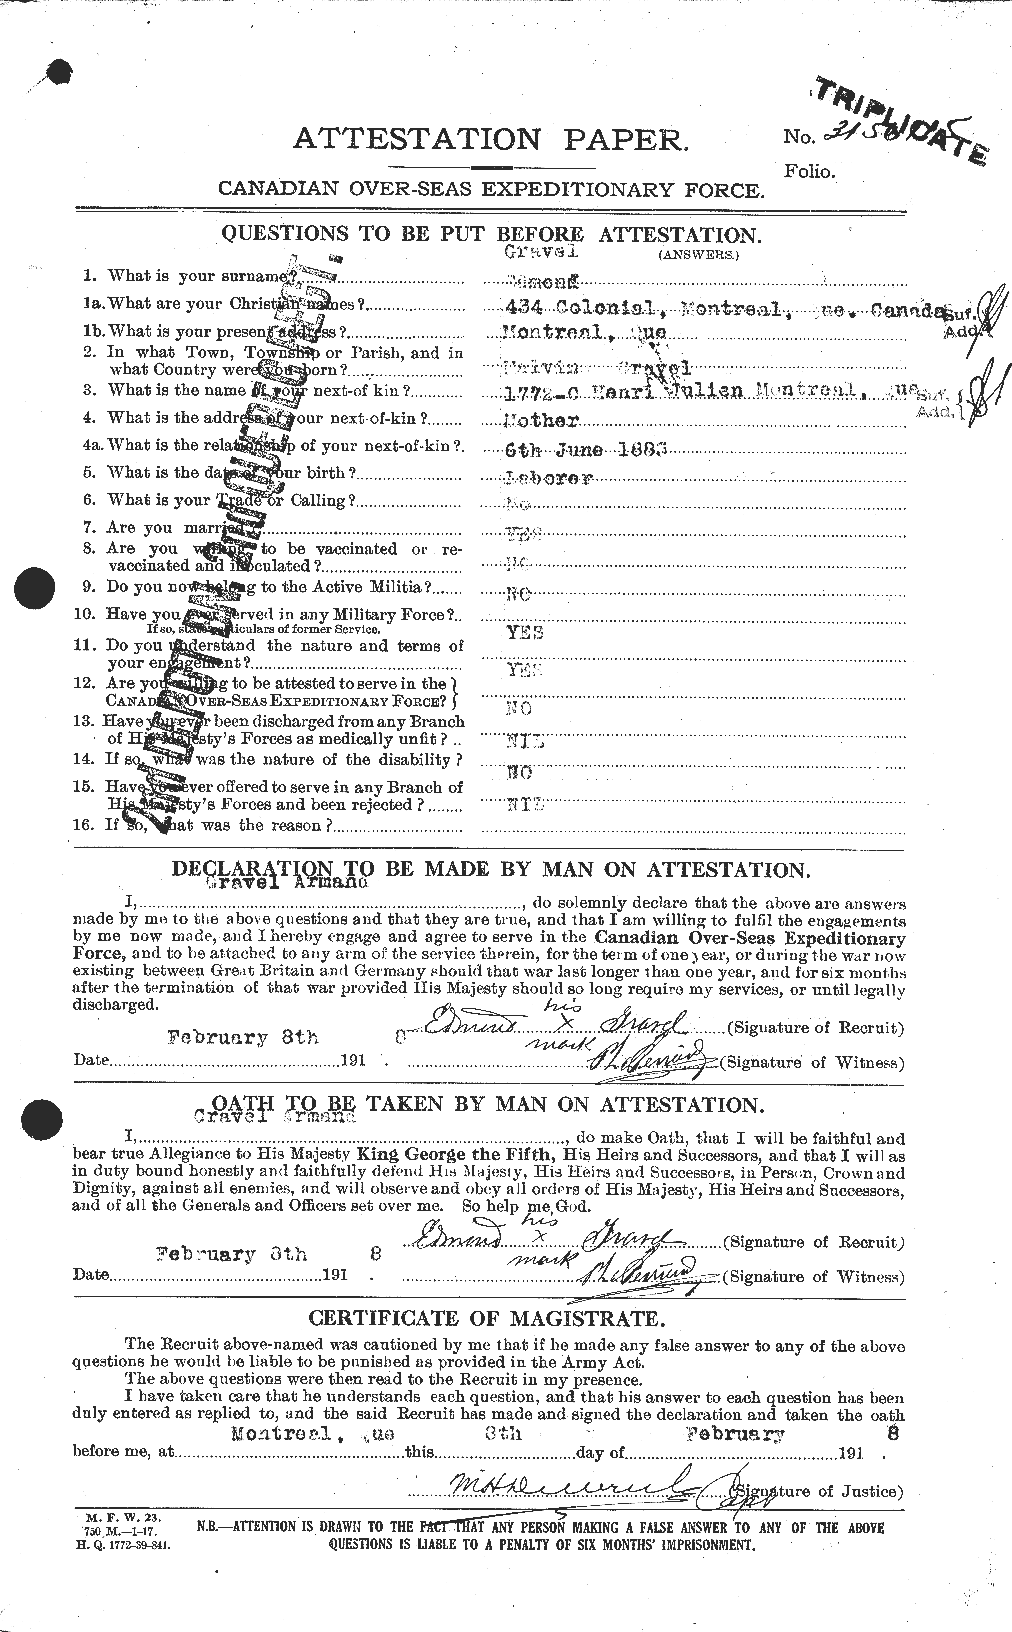 Personnel Records of the First World War - CEF 364614a